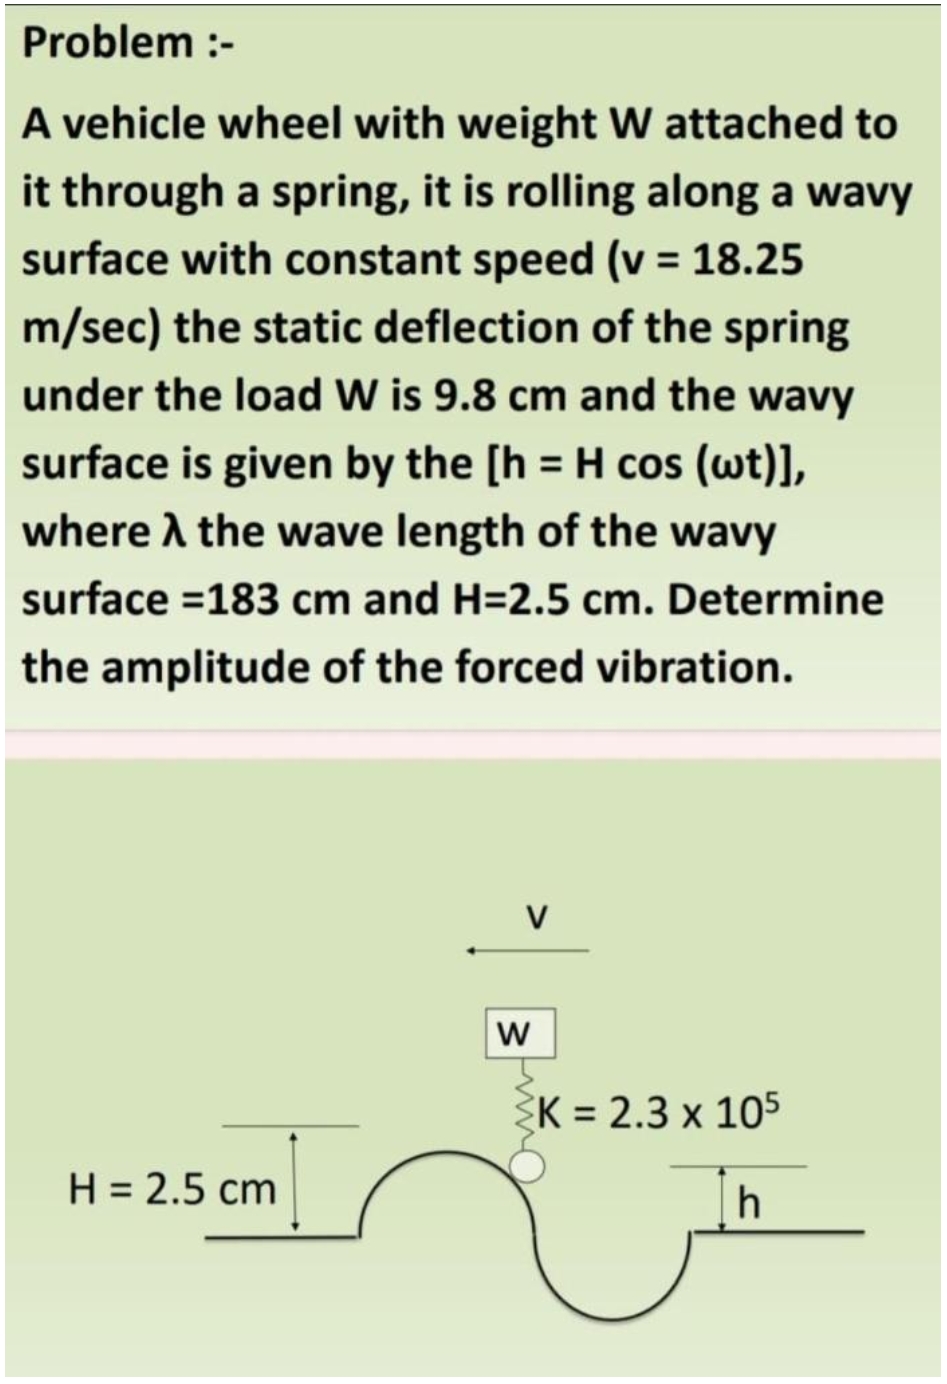 Problem :-
A vehicle wheel with weight W attached to
it through a spring, it is rolling along a wavy
surface with constant speed (v = 18.25
m/sec) the static deflection of the spring
under the load W is 9.8 cm and the wavy
surface is given by the [h= H cos (wt)],
where ▸ the wave length of the wavy
surface =183 cm and H=2.5 cm. Determine
the amplitude of the forced vibration.
K = 2.3 x 105
H = 2.5 cm
h
stimo
W